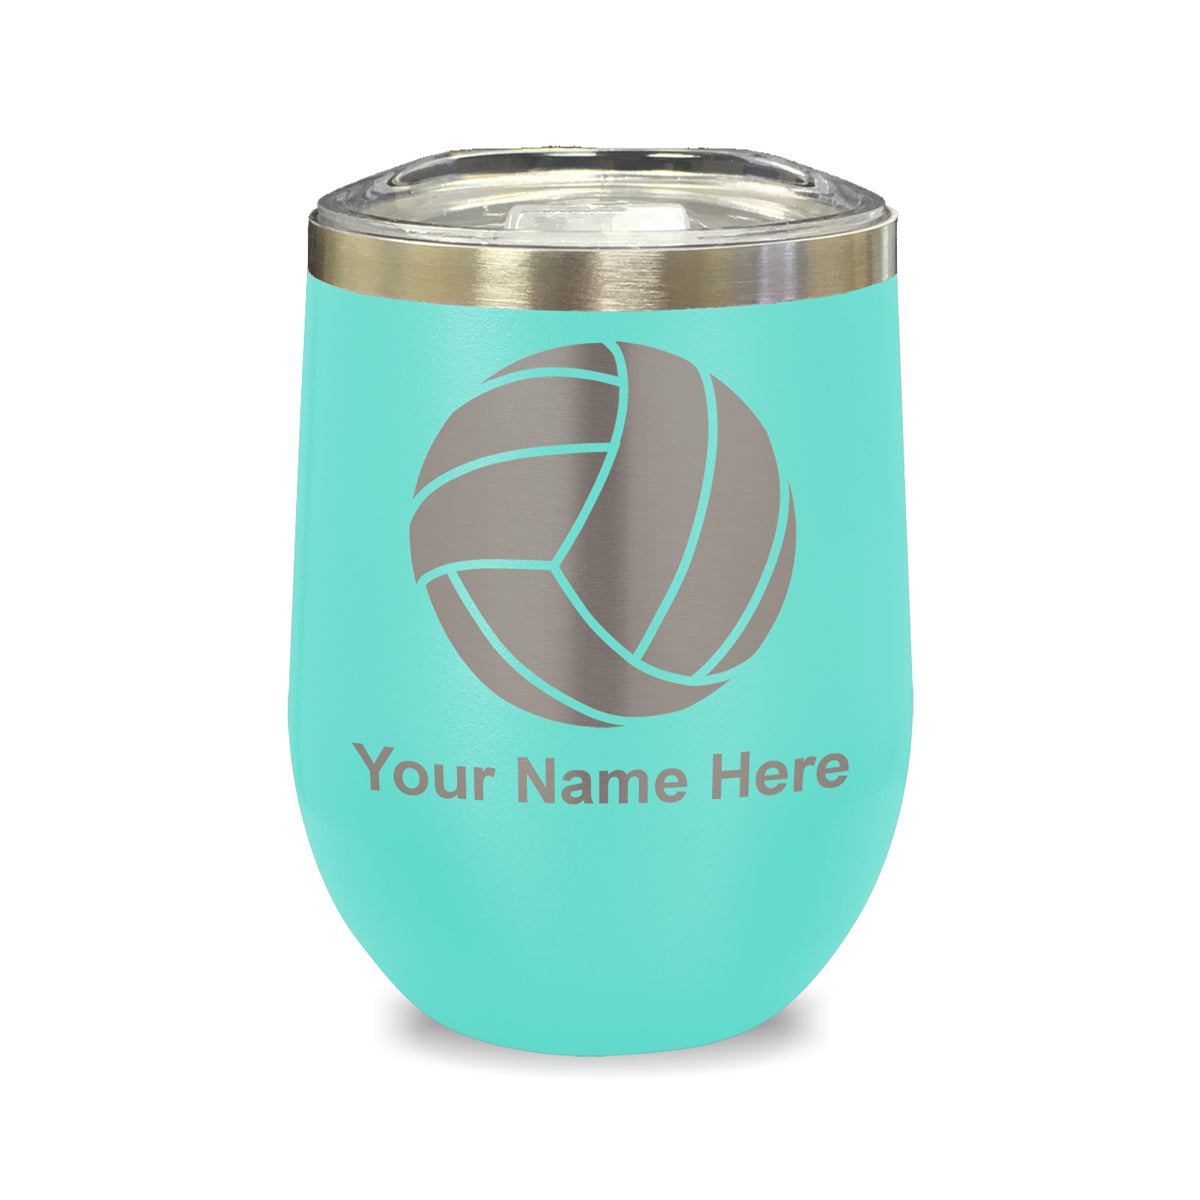 LaserGram Double Wall Stainless Steel Wine Glass, Volleyball Ball, Personalized Engraving Included